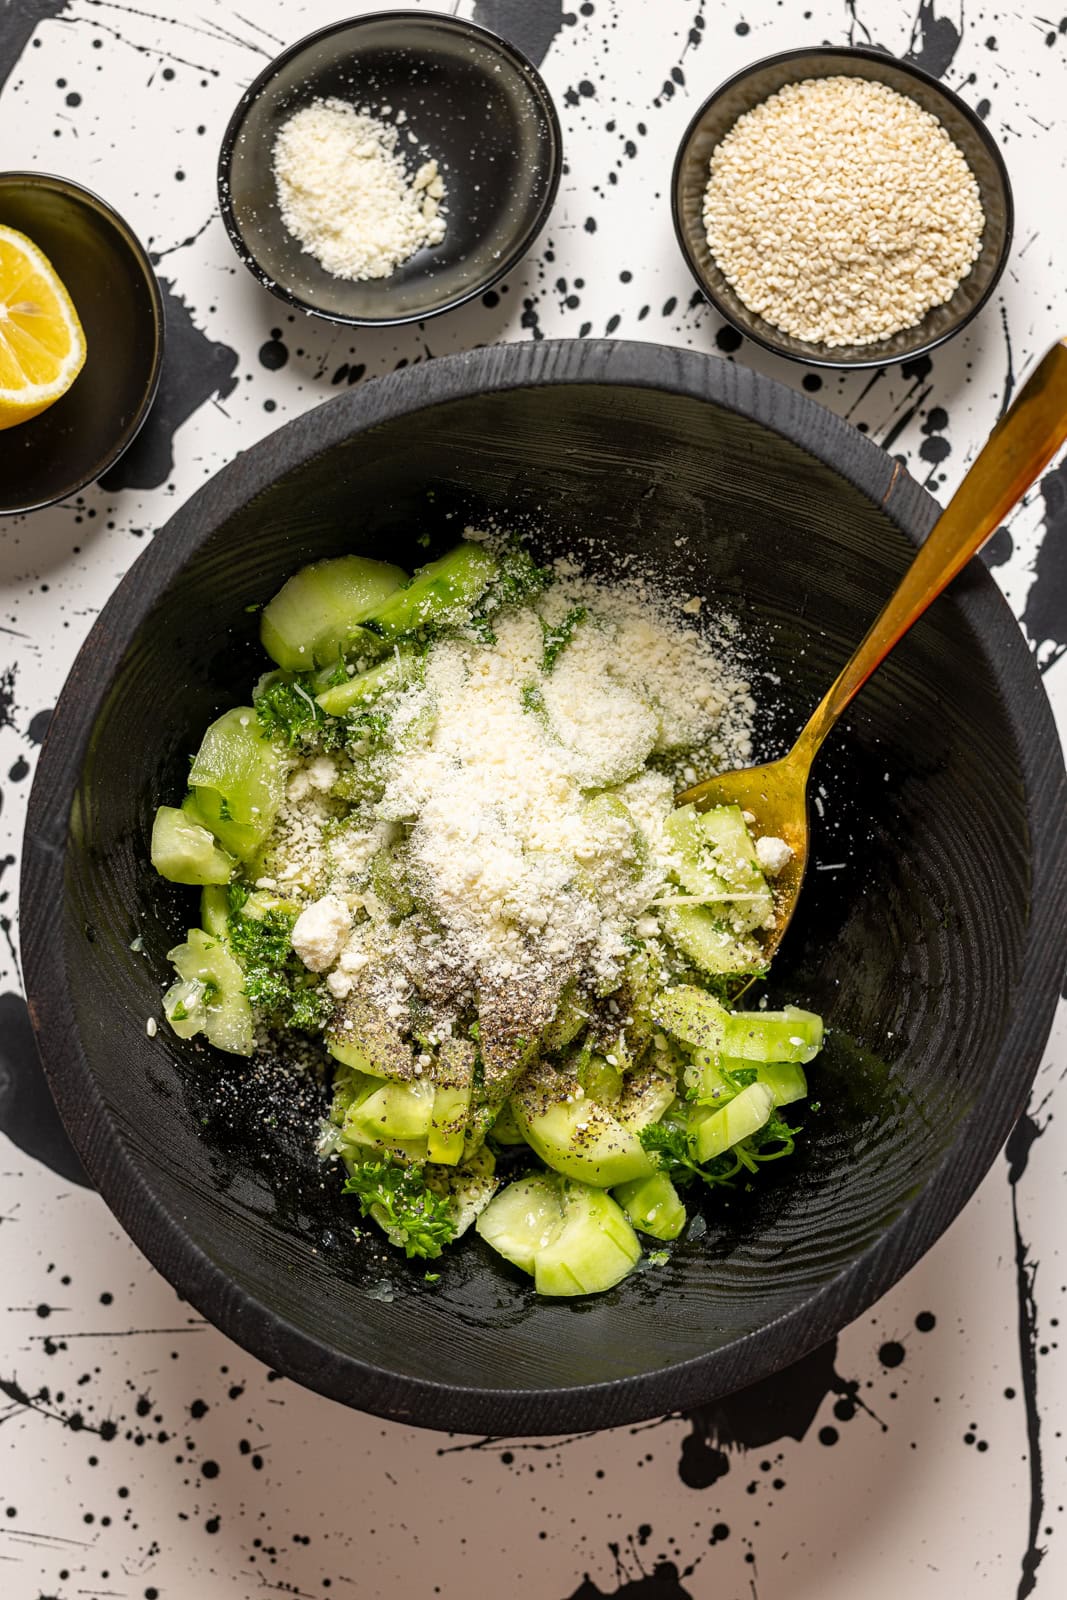 All ingredients together in a black bowl with a spoon.